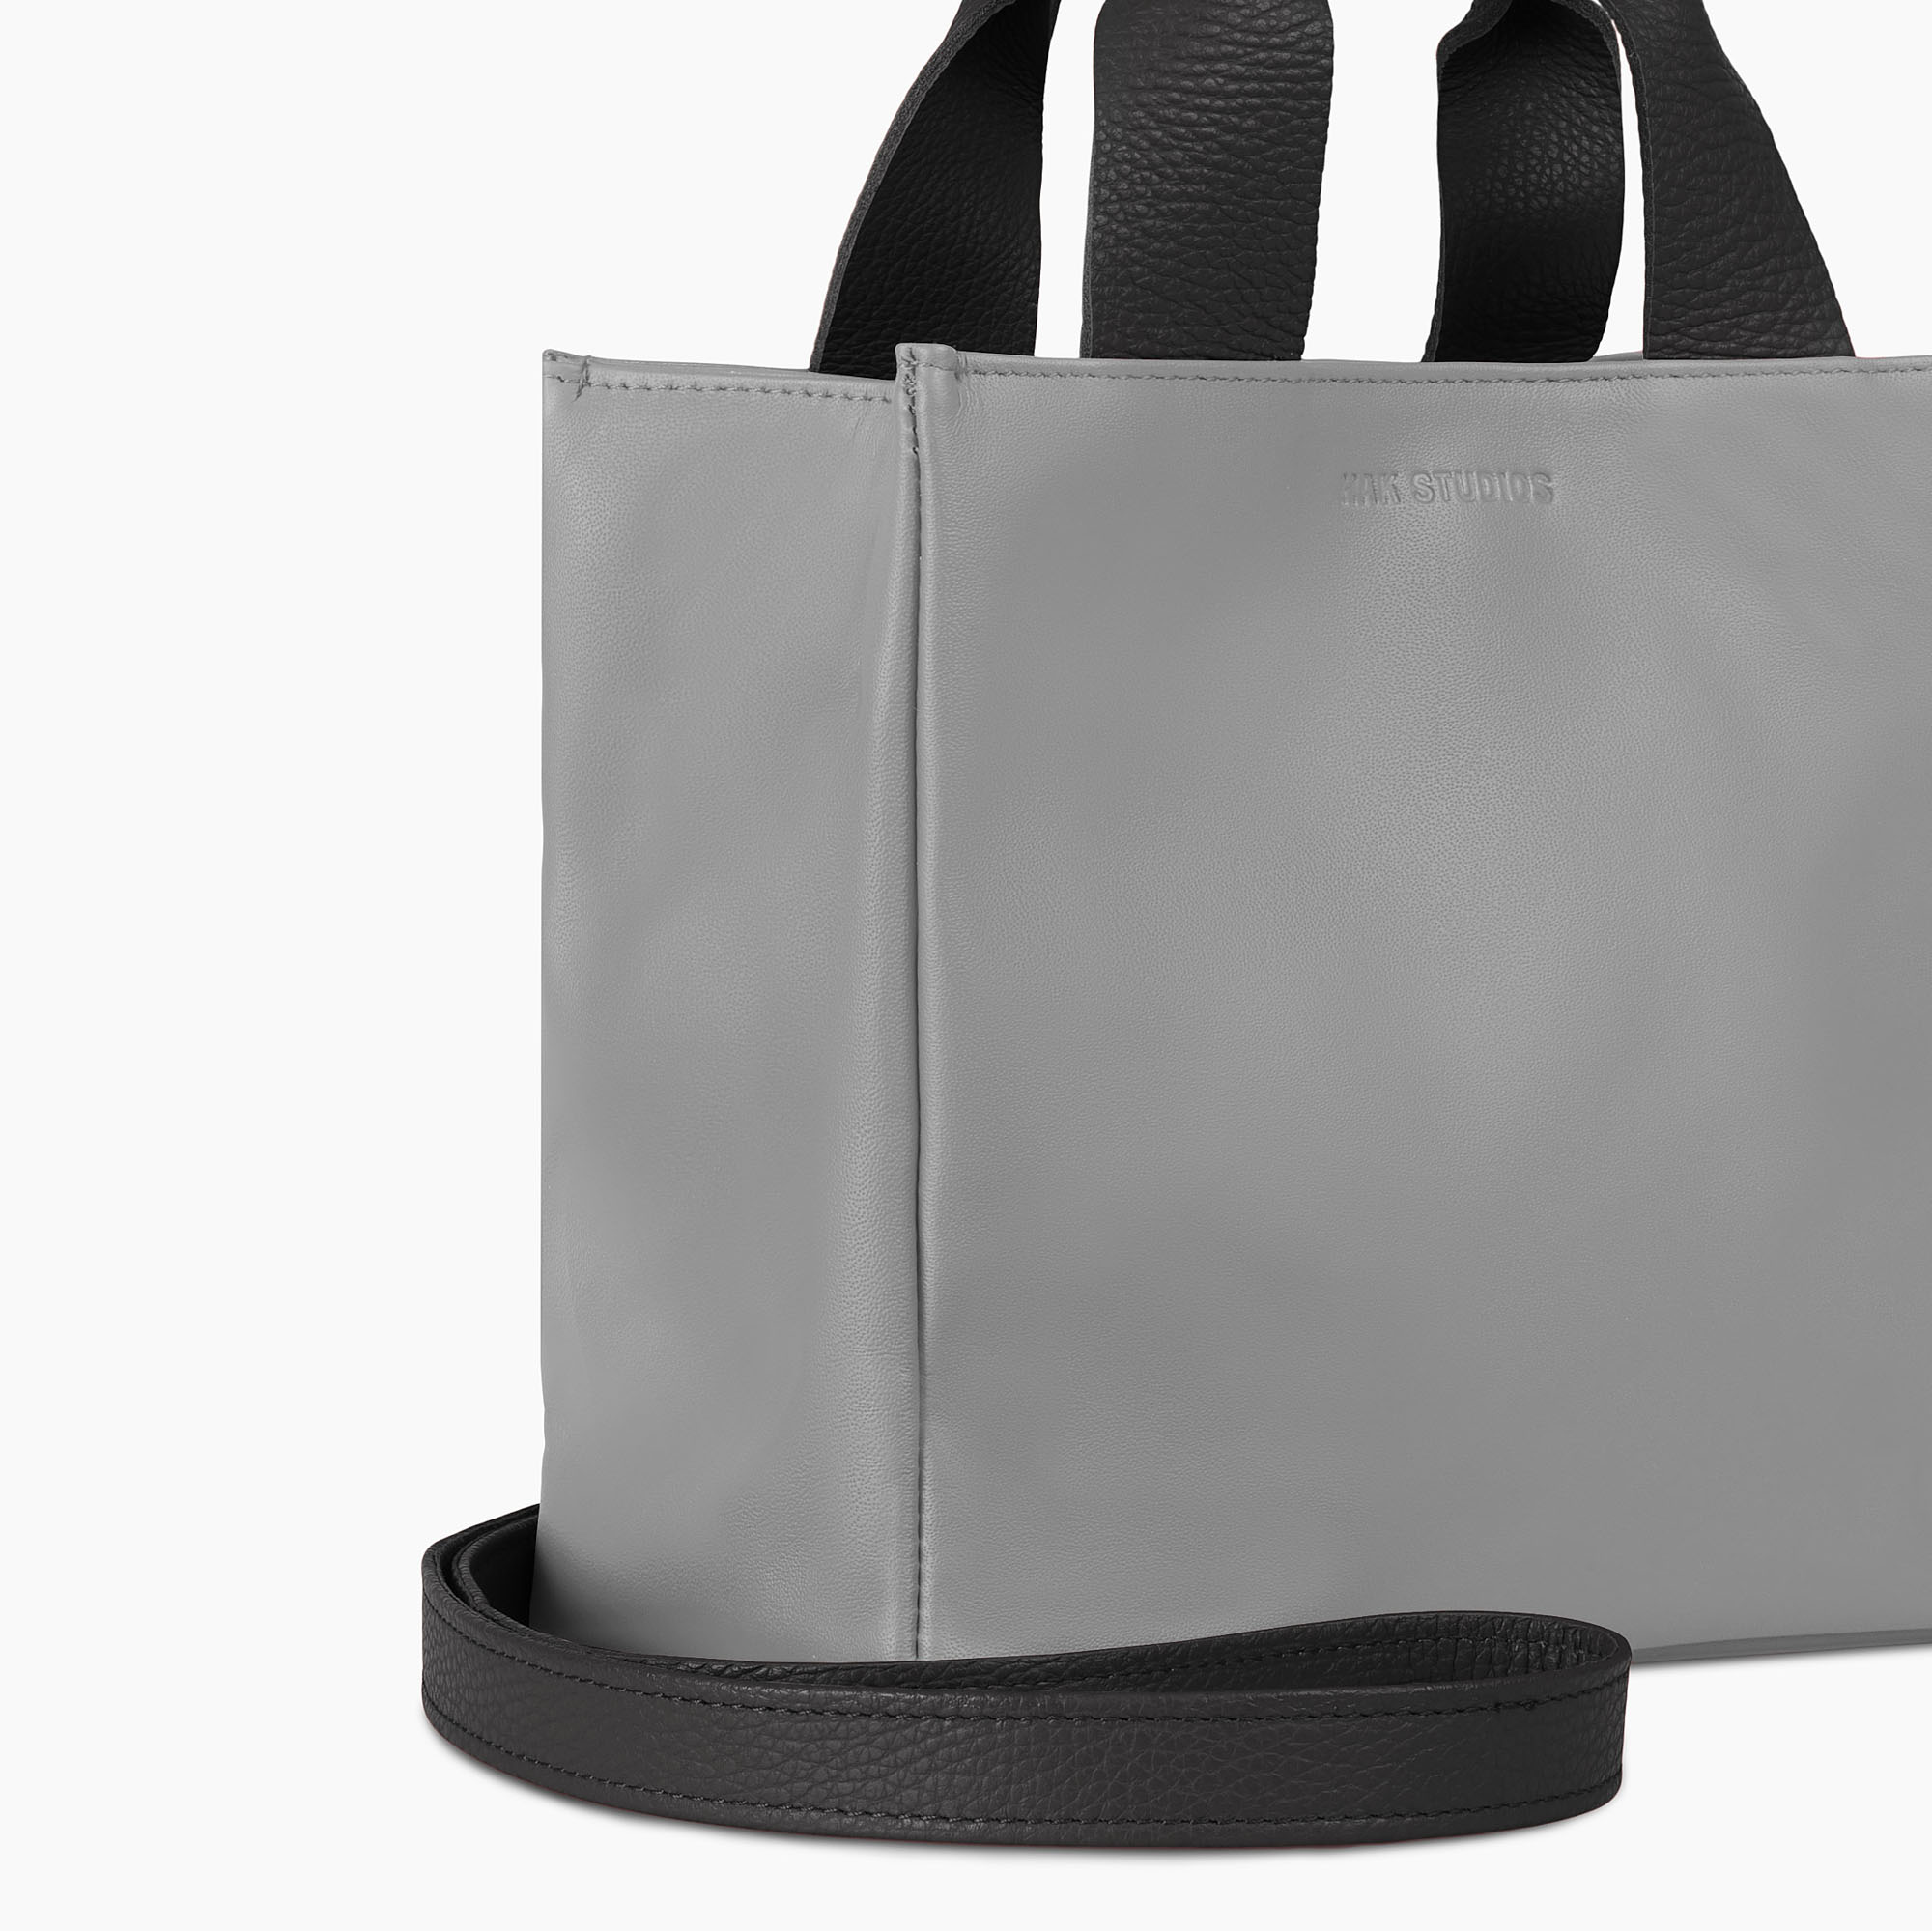 Small leather tote bag in gray color